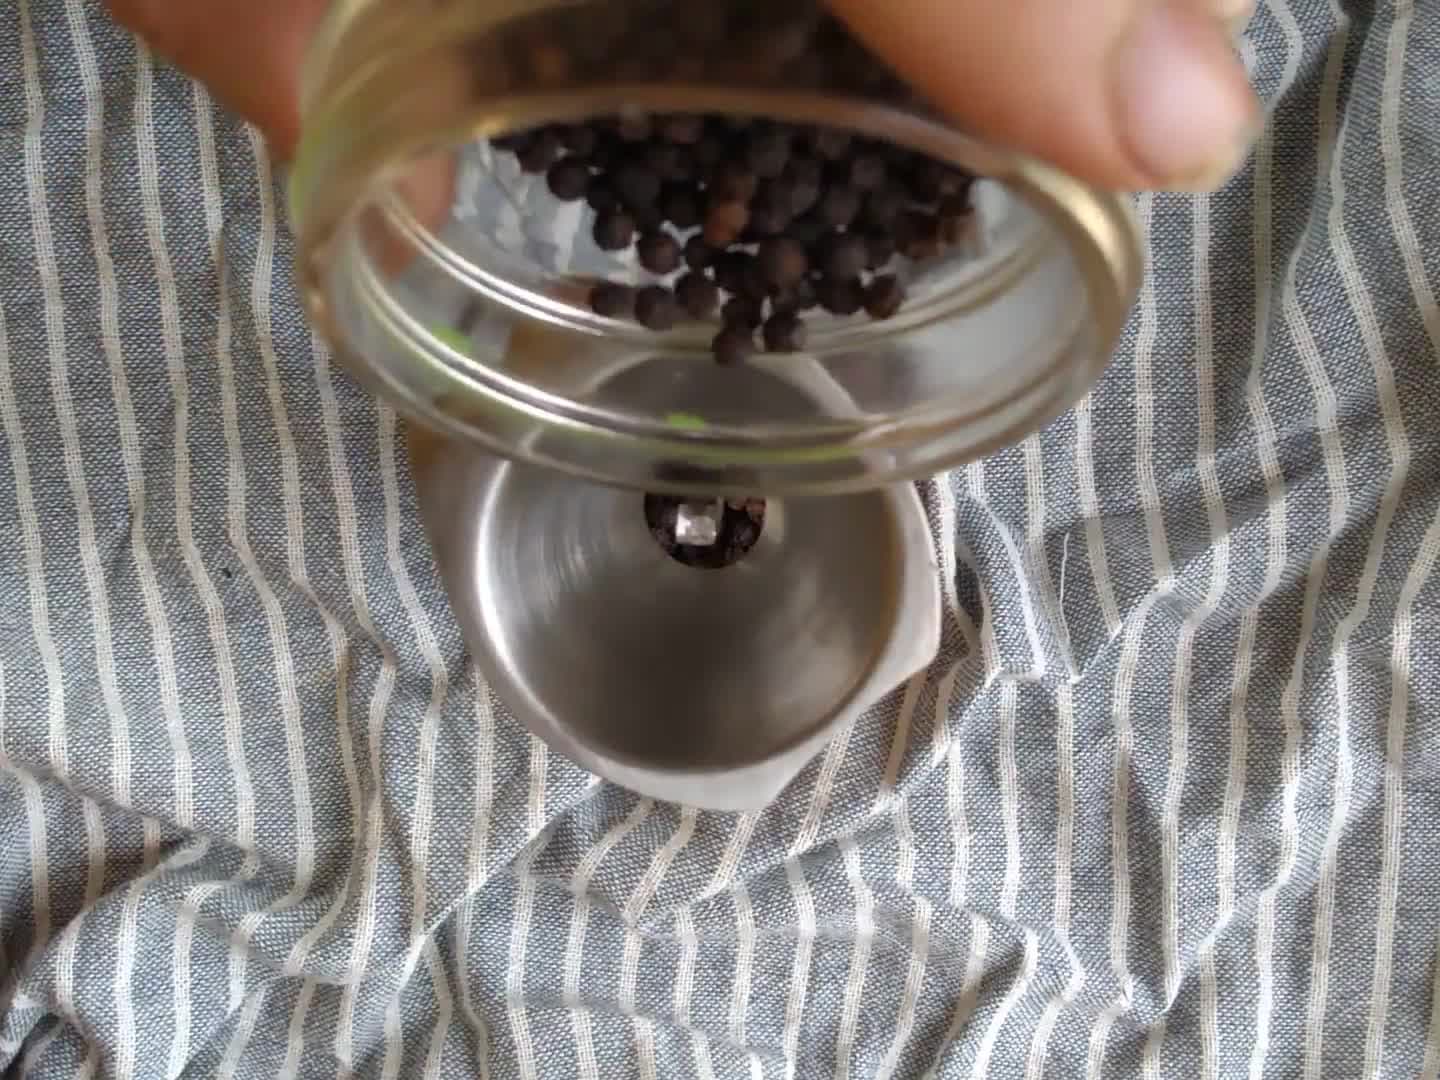 How to Open the McCormick Peppercorn Grinder in 1 Second